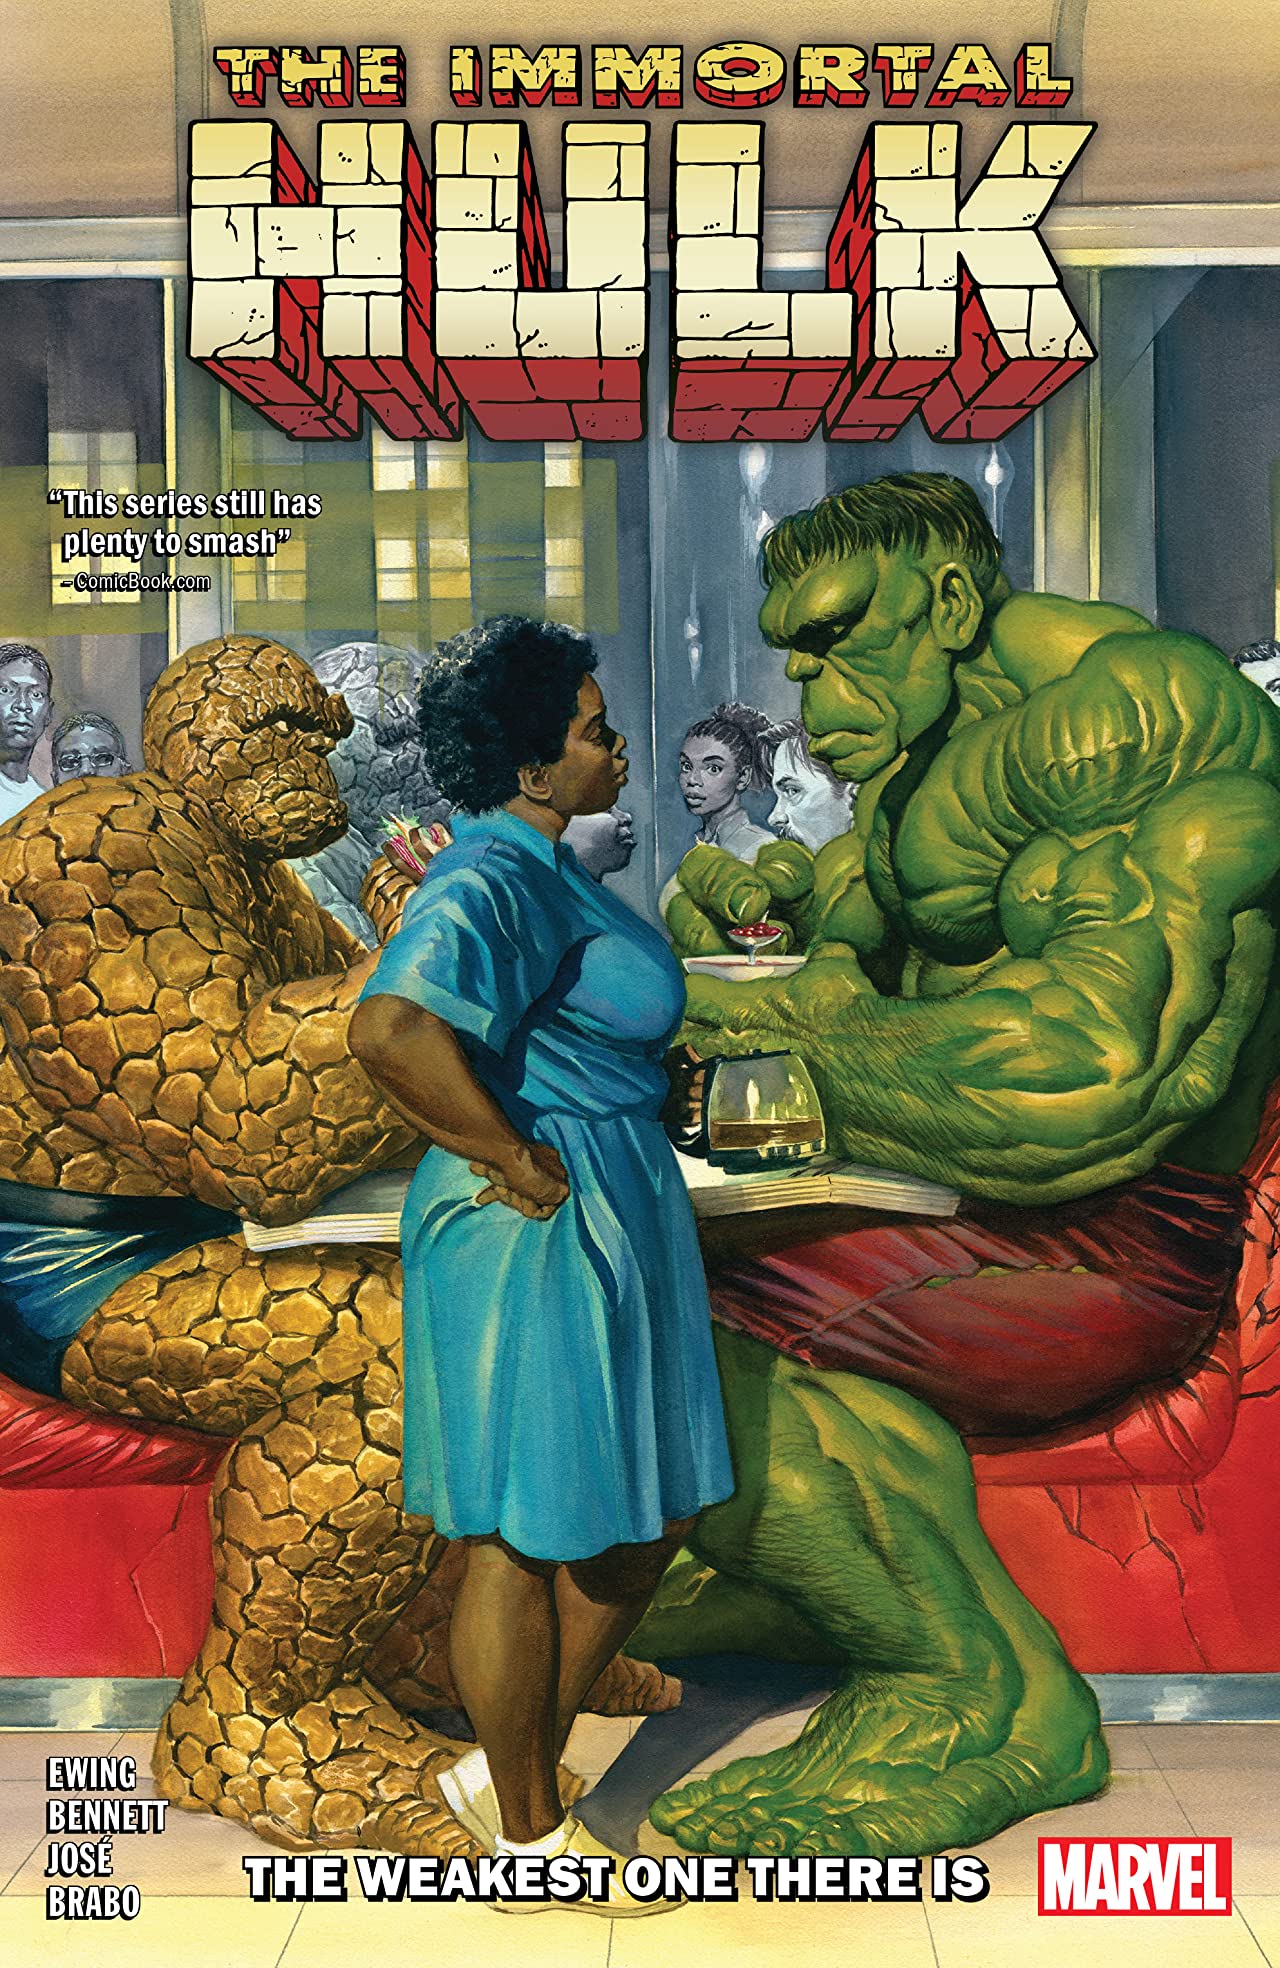 Immortal Hulk Vol. 9: The Weakest One There Is (Trade Paperback)